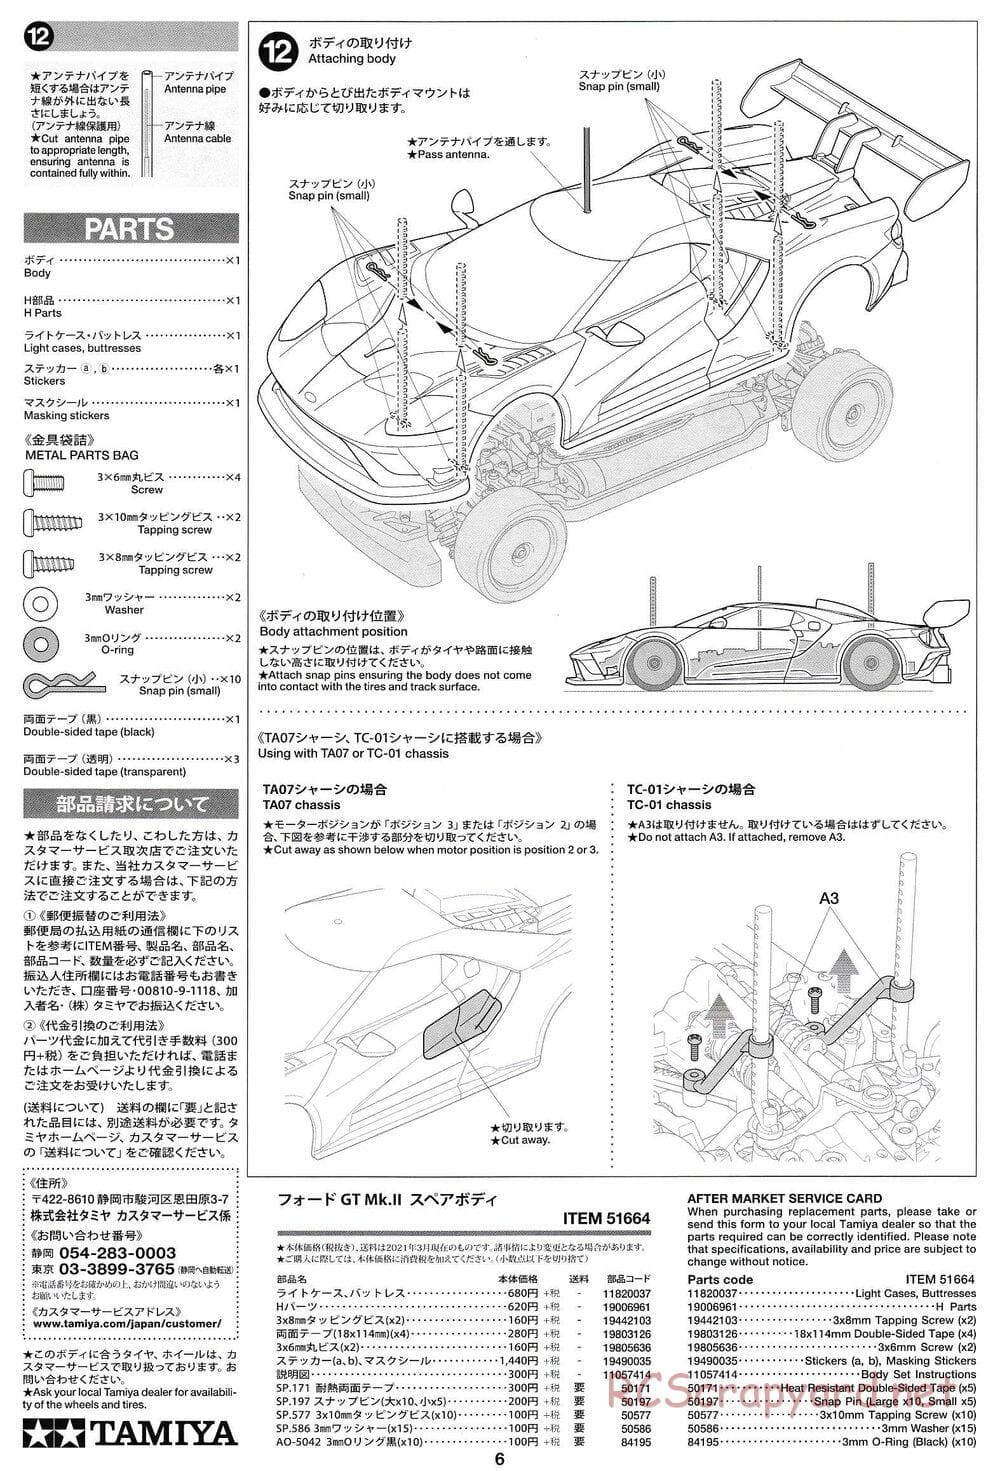 Tamiya - 2020 Ford GT Mk.II - TT-02 Chassis - Body Manual - Page 6